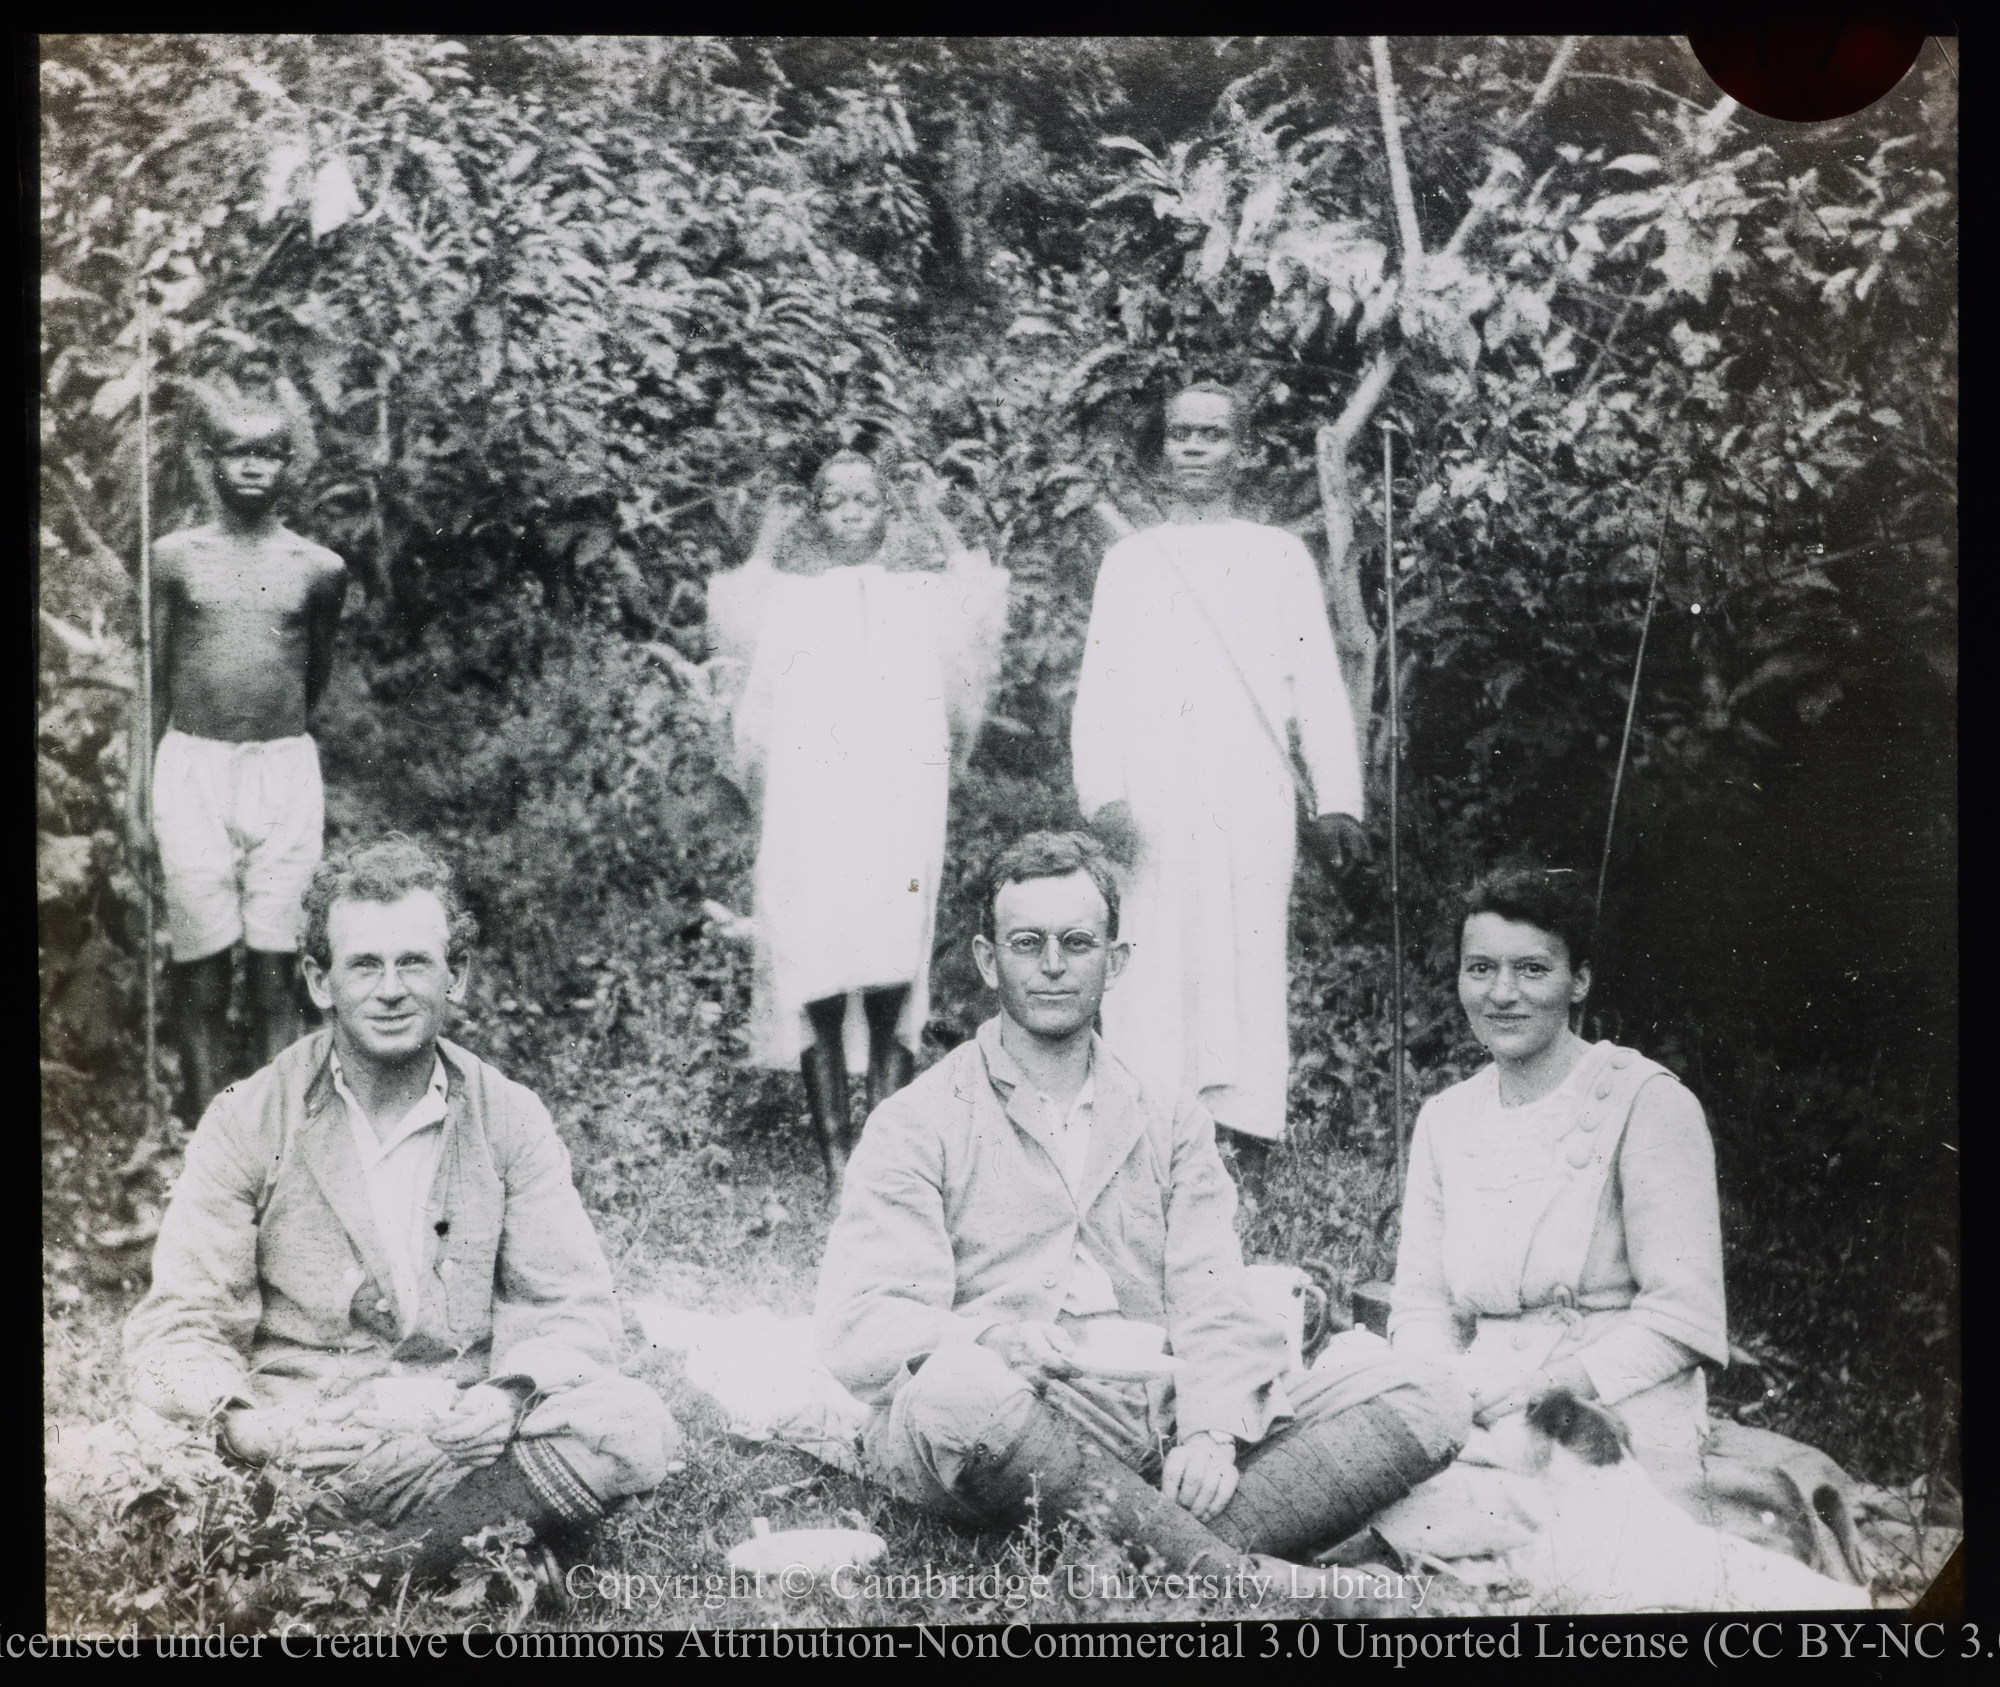 Canon K.St. A. Rogers, Rev. R. Banks and Mrs. Banks, seated in front of their guides, Upper Nile, 1915